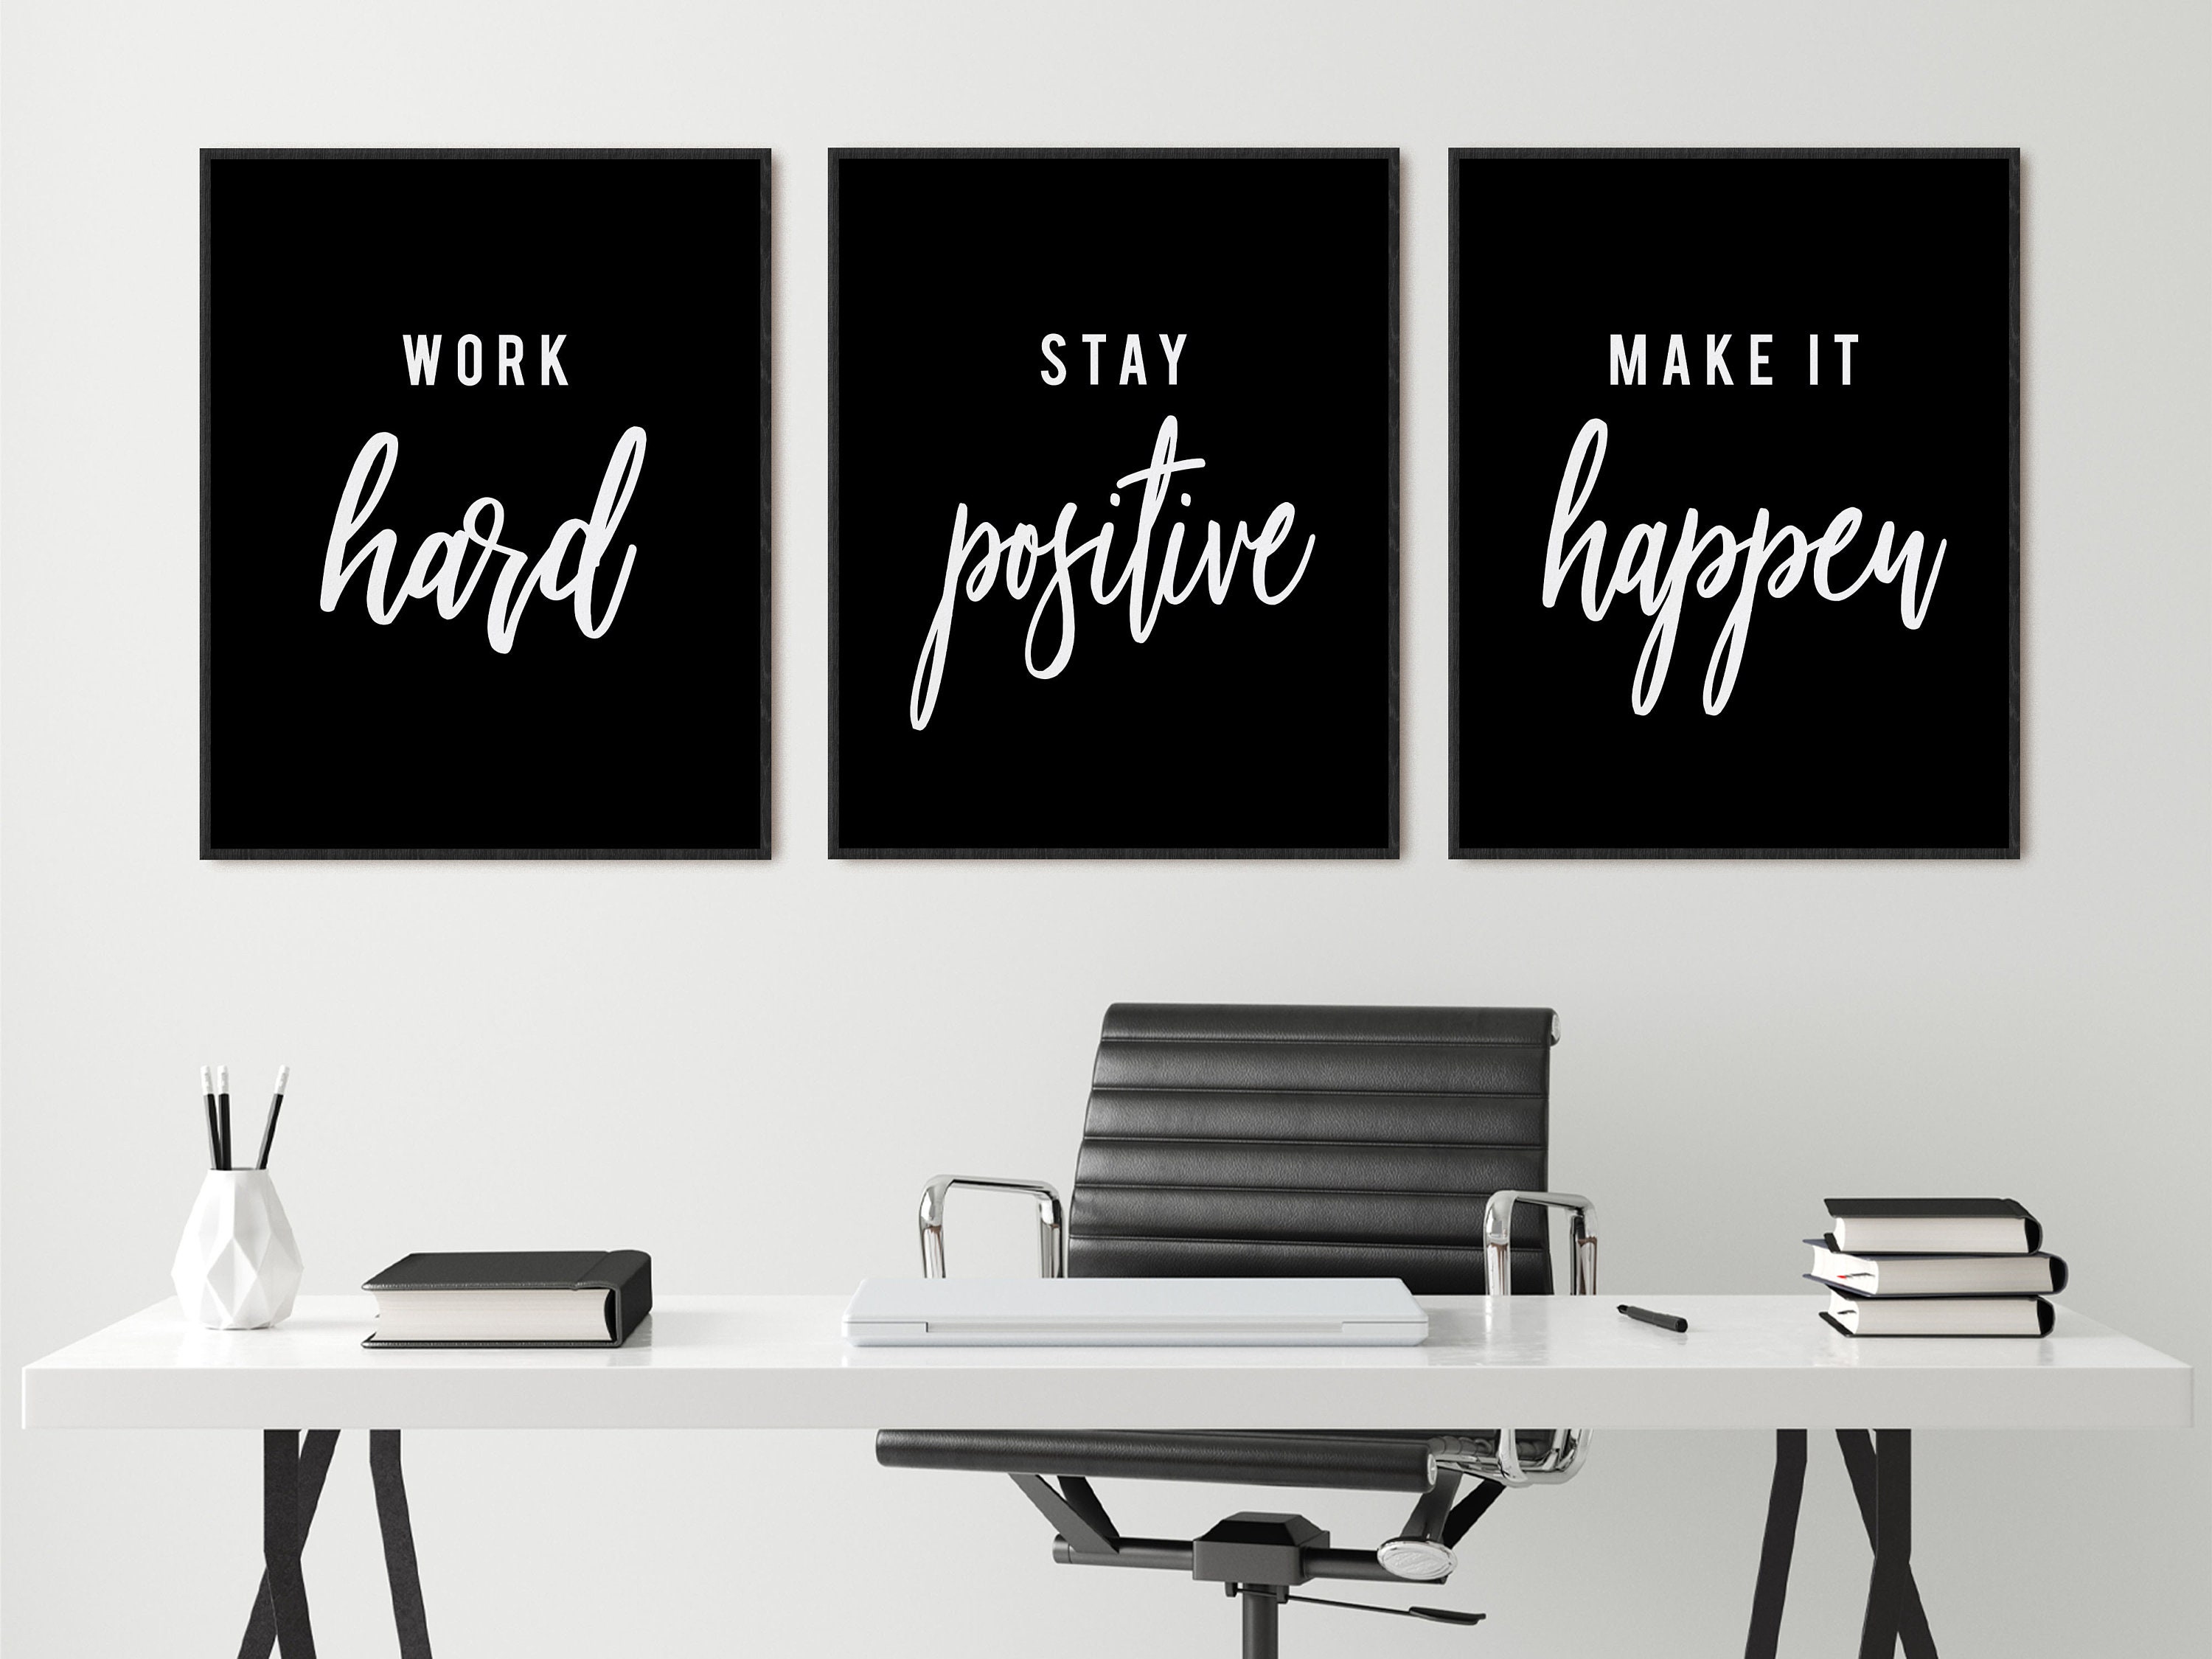 Black Office Decor Motivational Quote Work Hard Stay